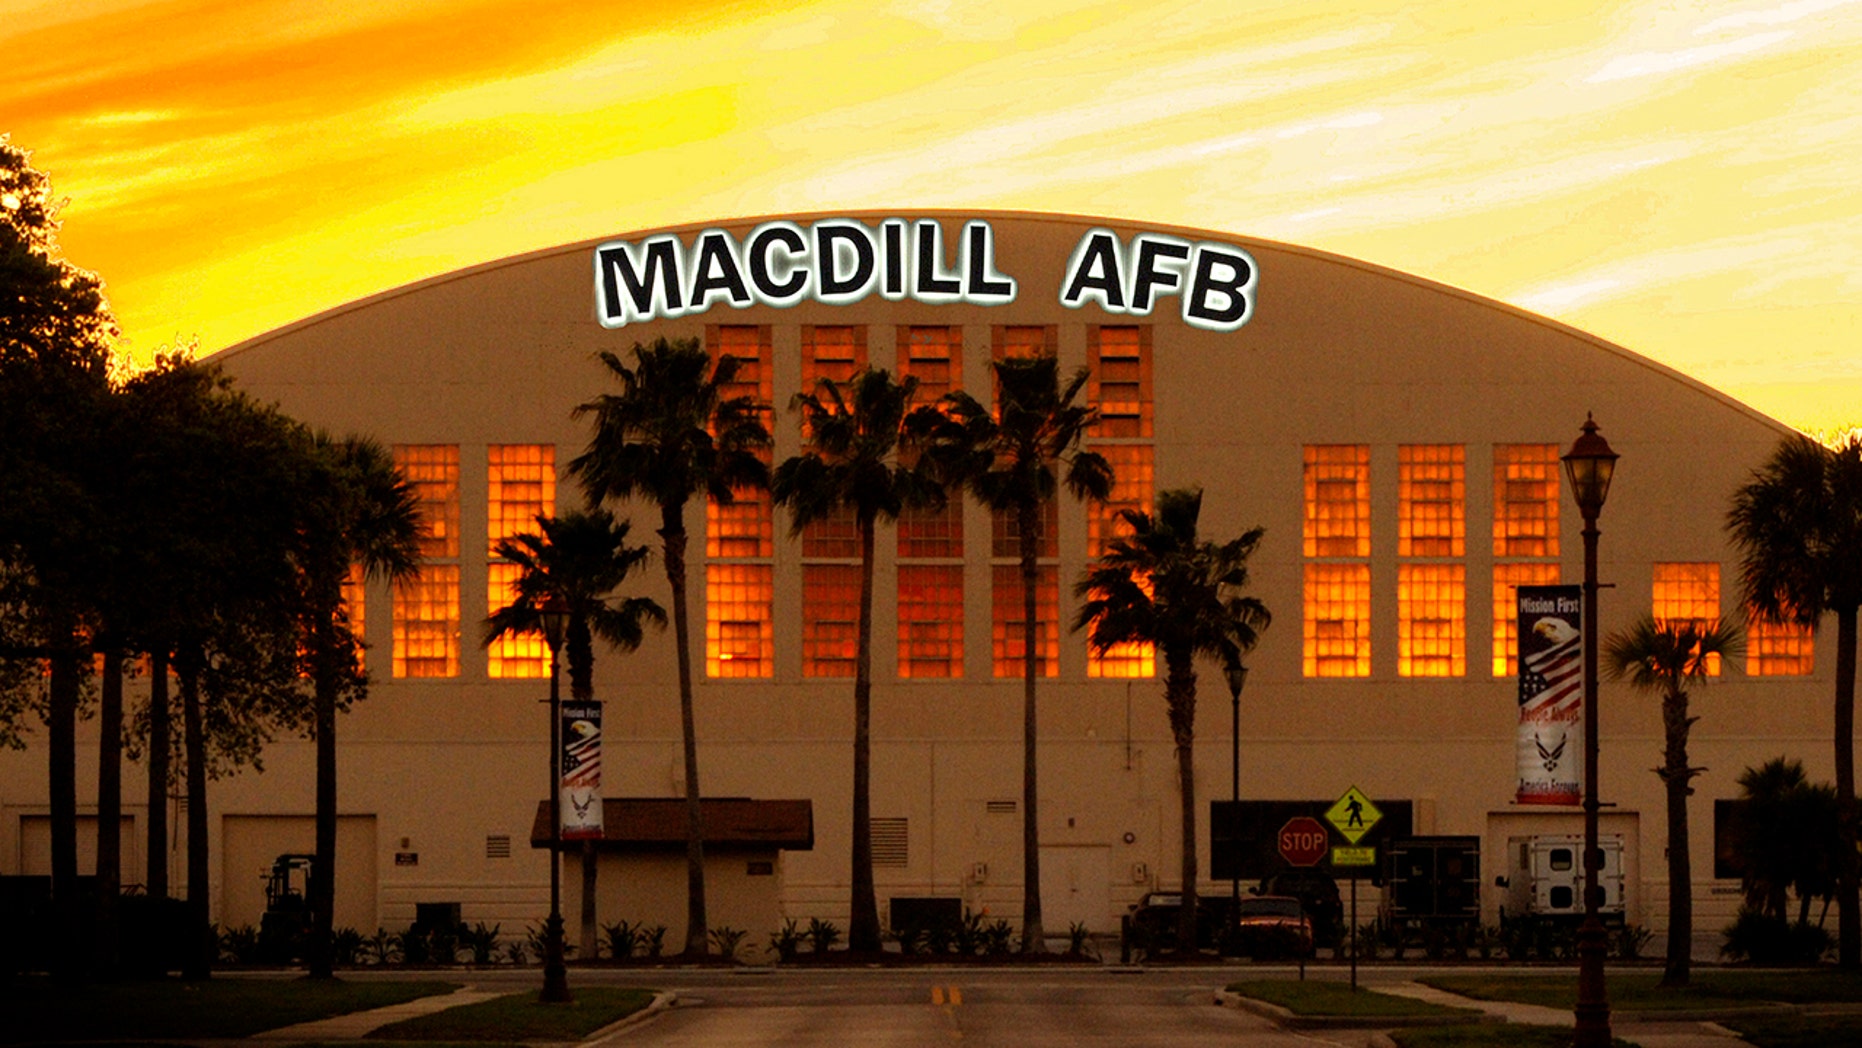 Combathardened Green Beret says MacDill Air Force Base, with moldy